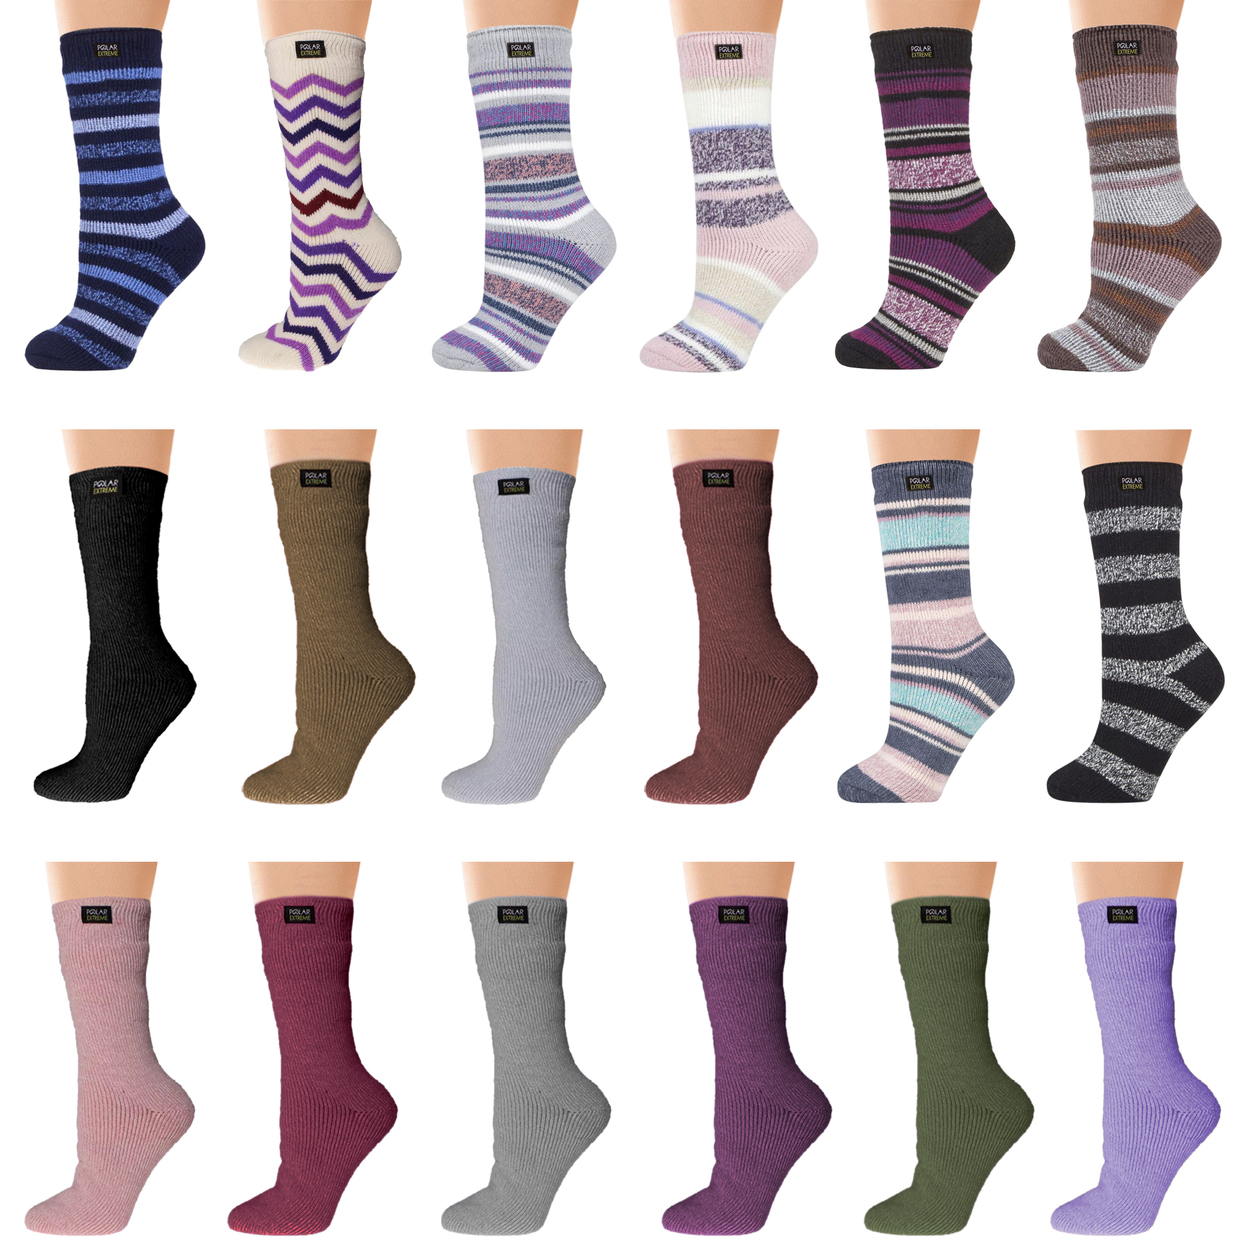 2-Pairs: Women's Polar Extreme Insulated Thermal Ultra-Soft Winter Warm Crew Socks